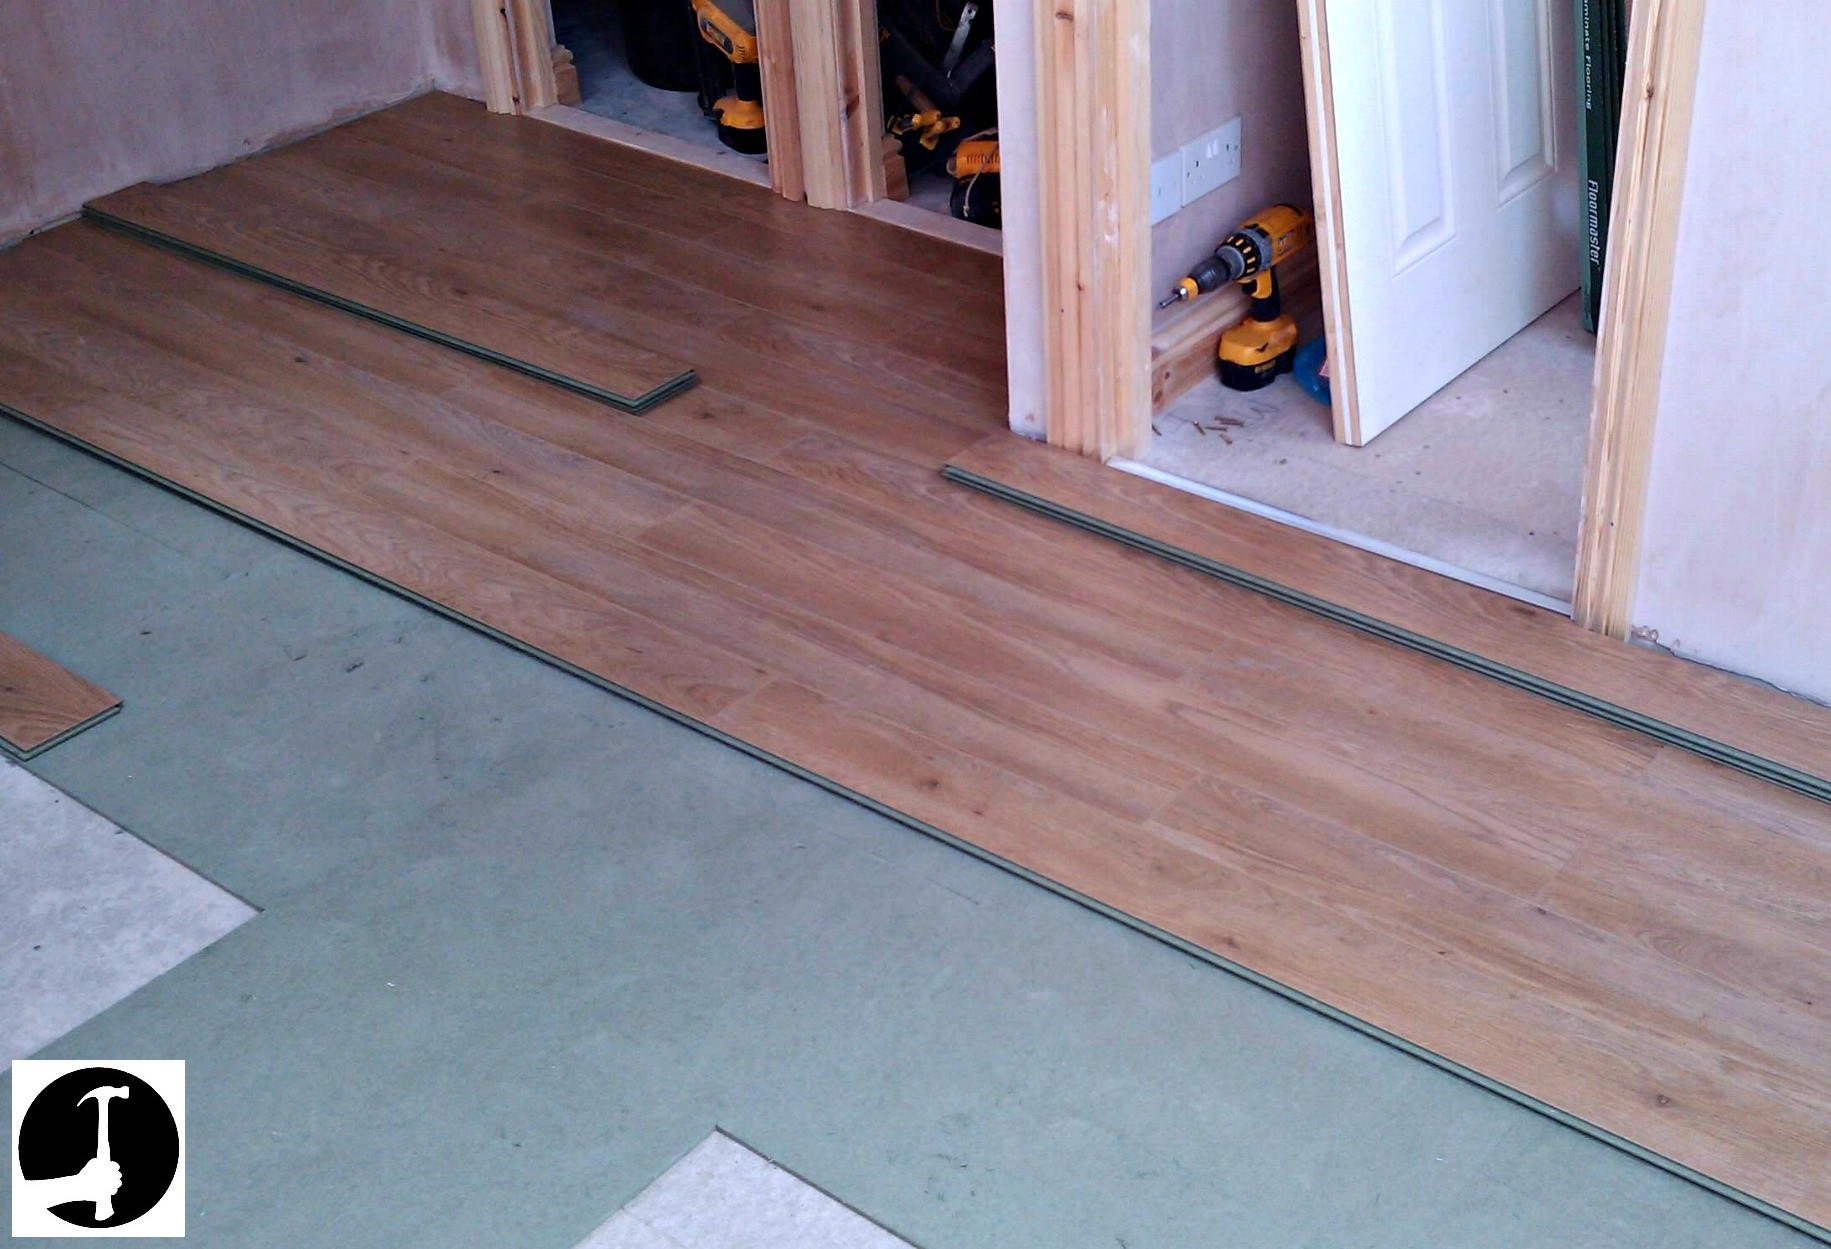 Putting Hardwood Floors On Concrete Of How to Install Laminate Flooring with Ease Glued Glue Less Systems with Laminate Started